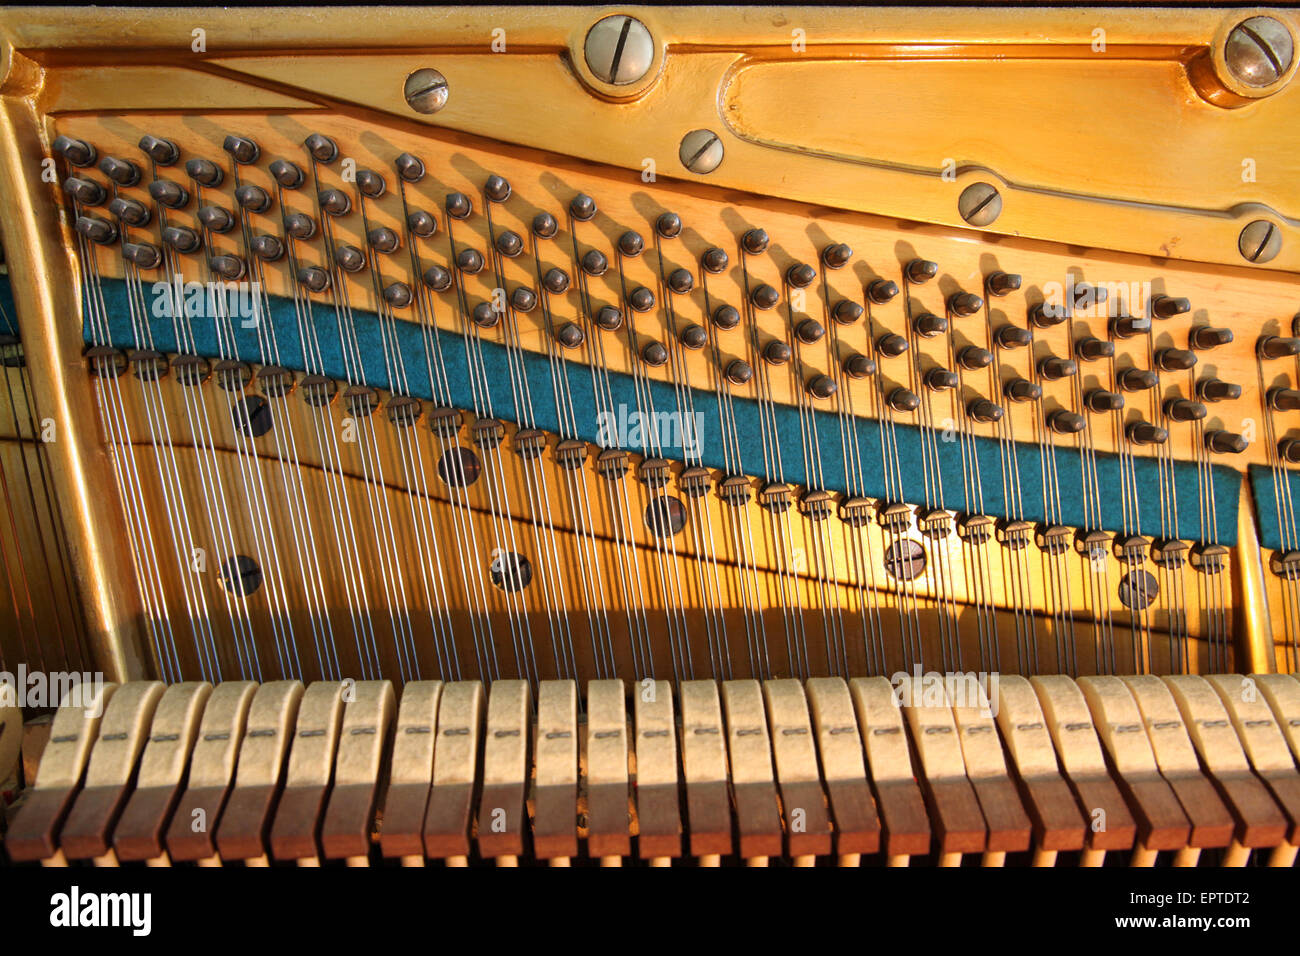 the strings, hammers, tuning pins and soundboard inside a Bechstein upright piano Stock Photo